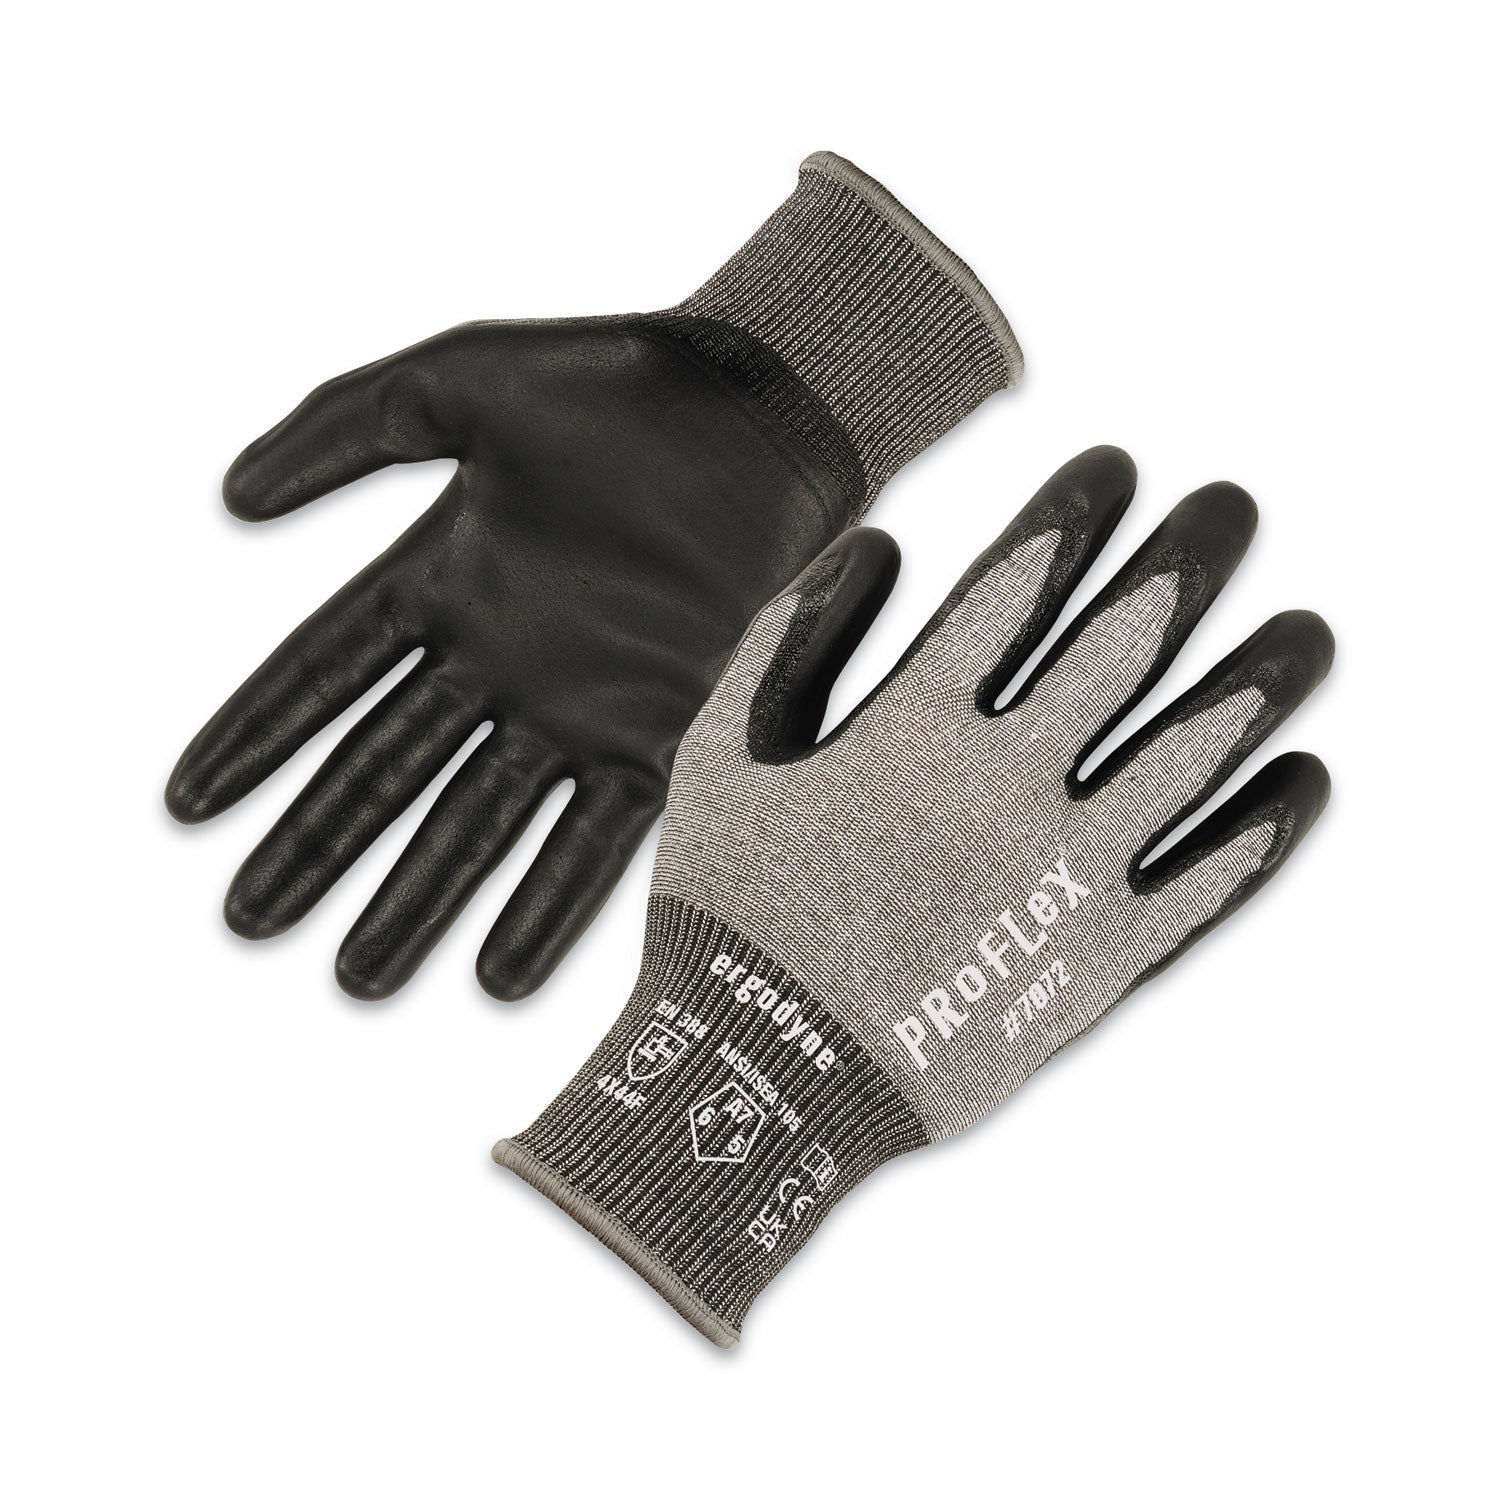 proflex-7072-ansi-a7-nitrile-coated-cr-gloves-gray-x-large-pair-ships-in-1-3-business-days_ego10315 - 1